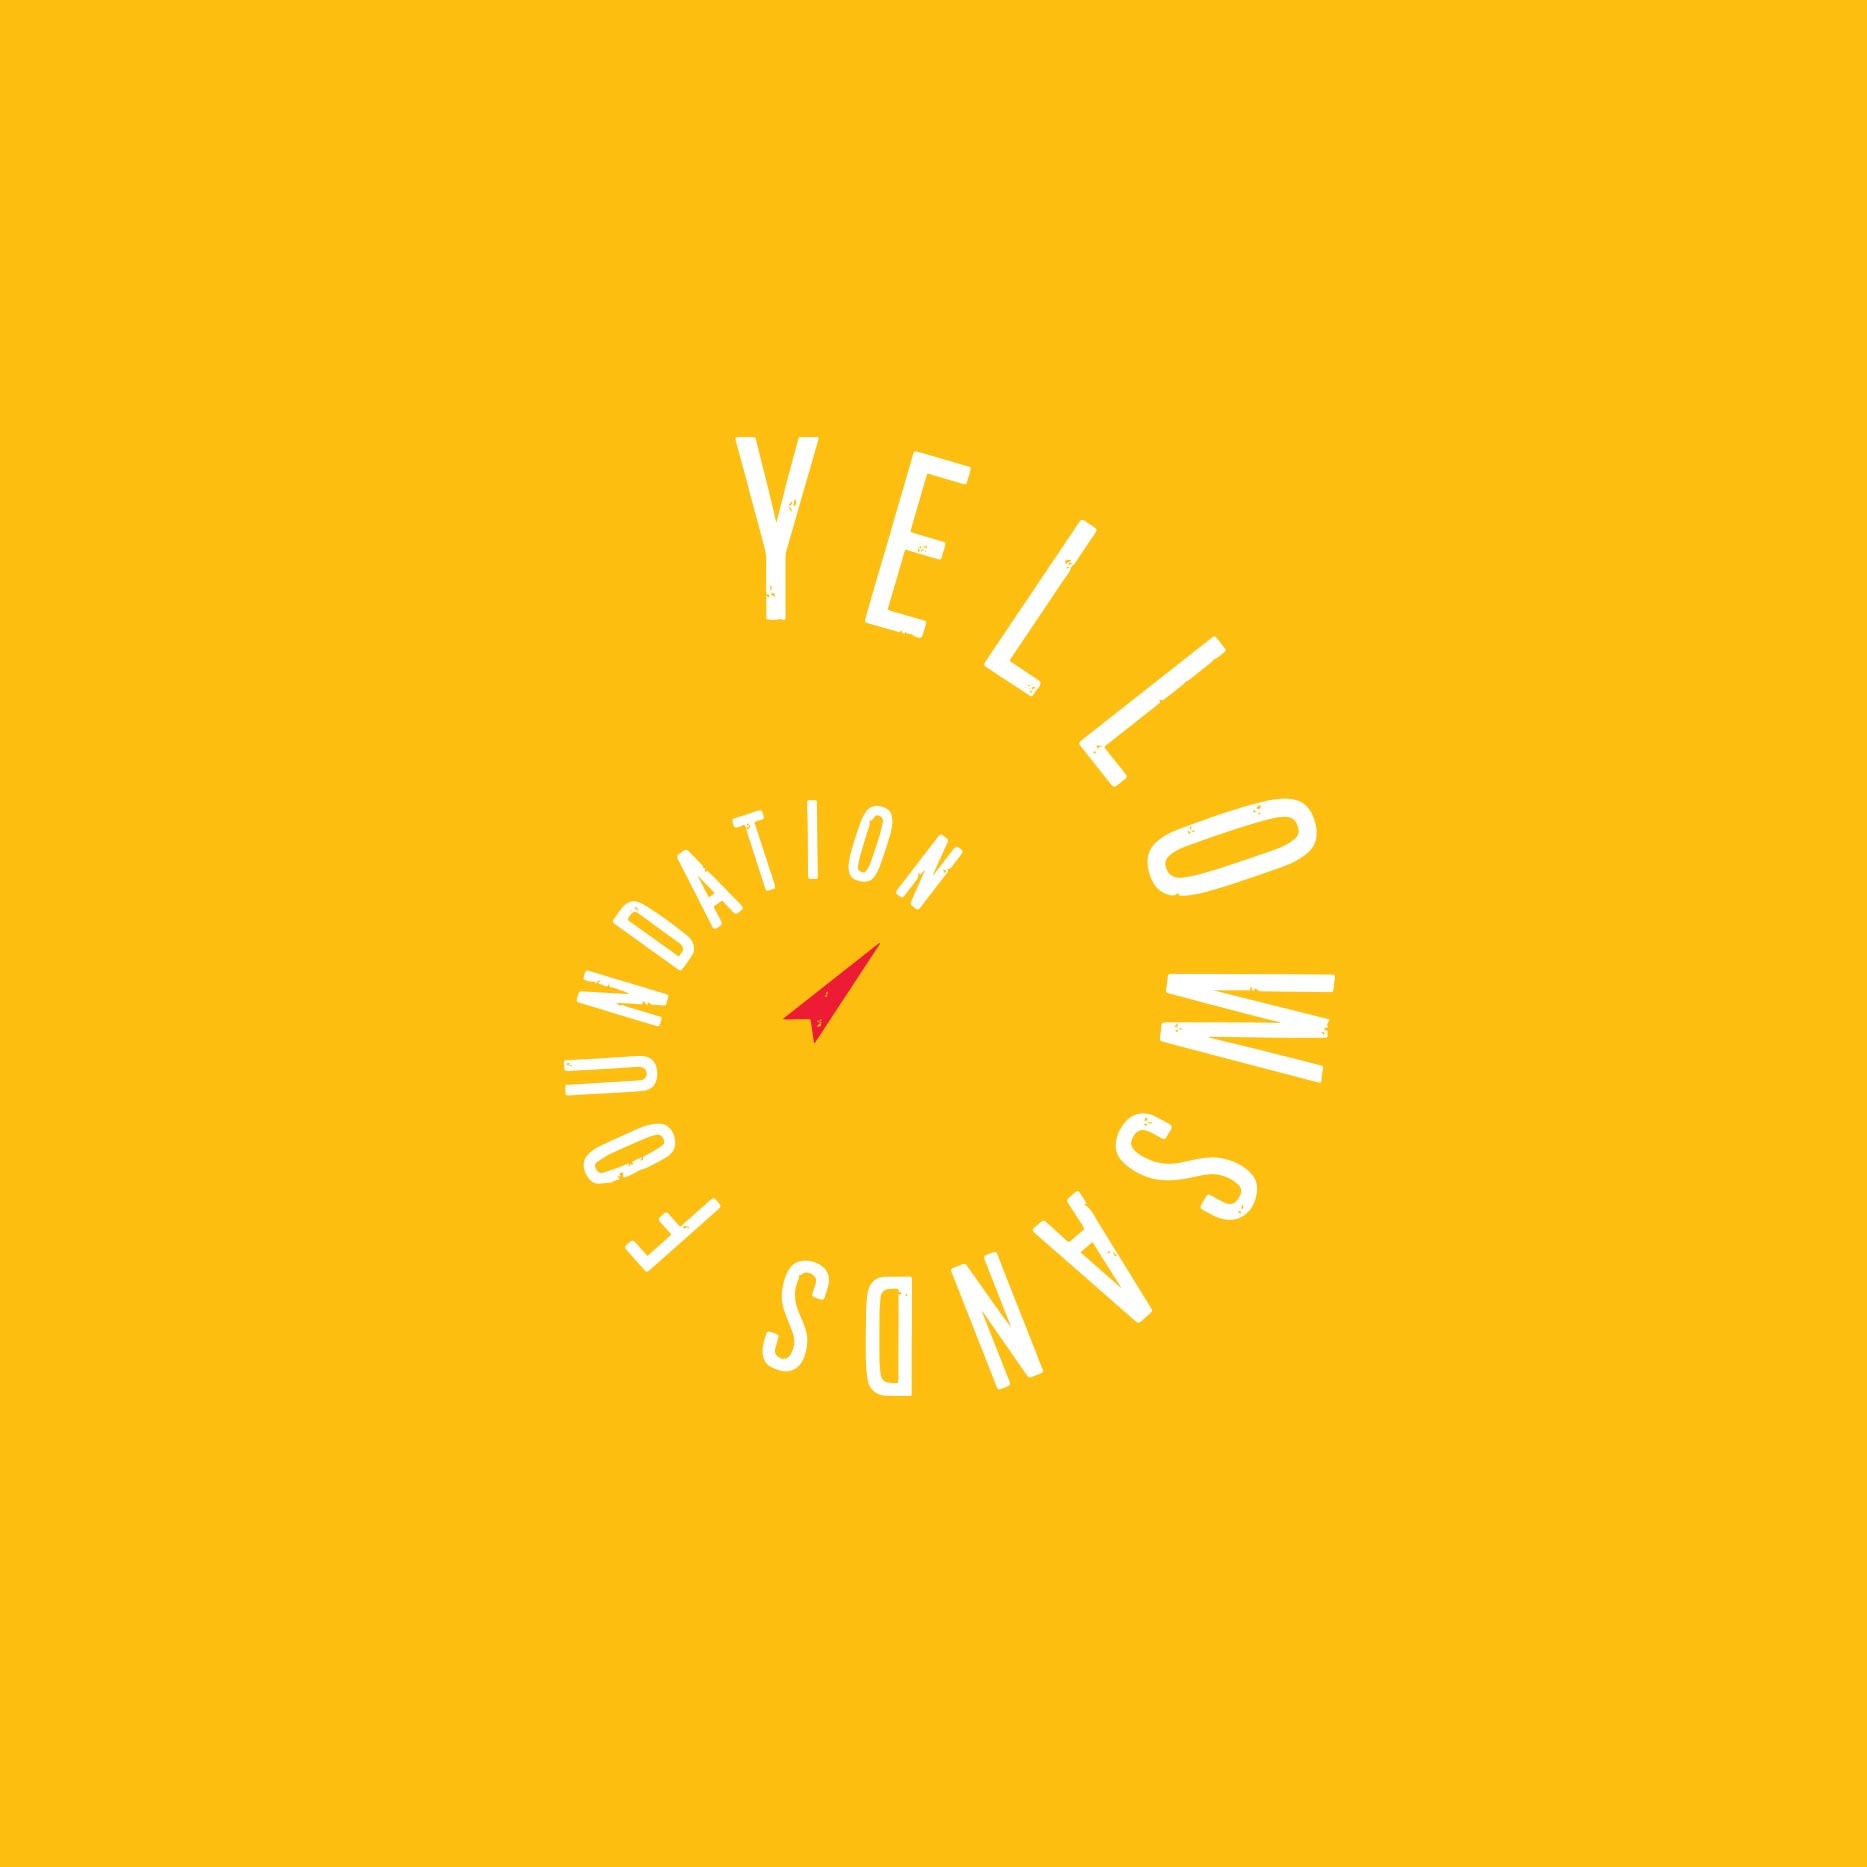 LOGO white and red - solid yellow background.png